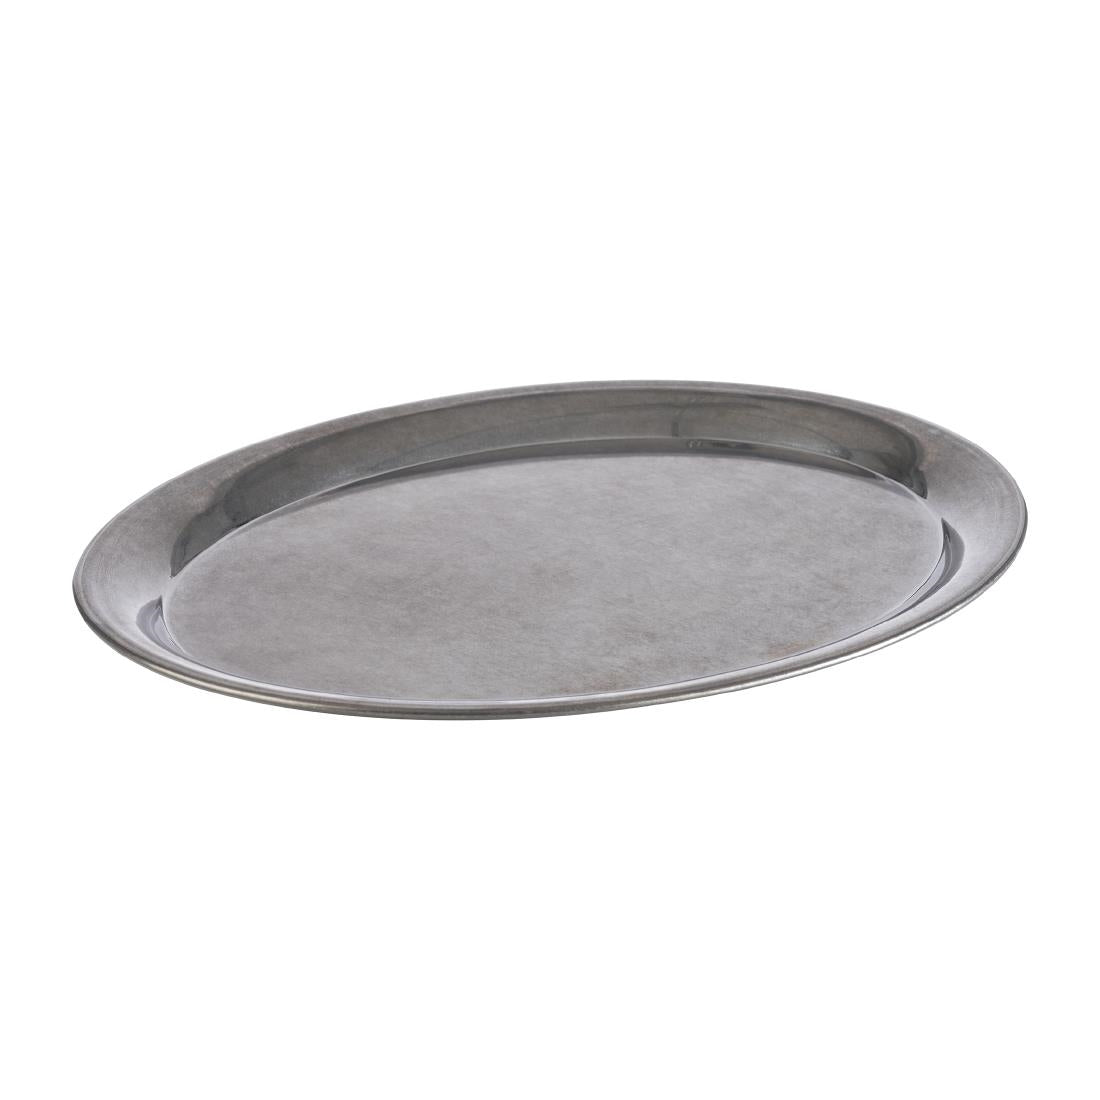 FT173 APS Coffeehouse Vintage Tray 290 x 220mm JD Catering Equipment Solutions Ltd